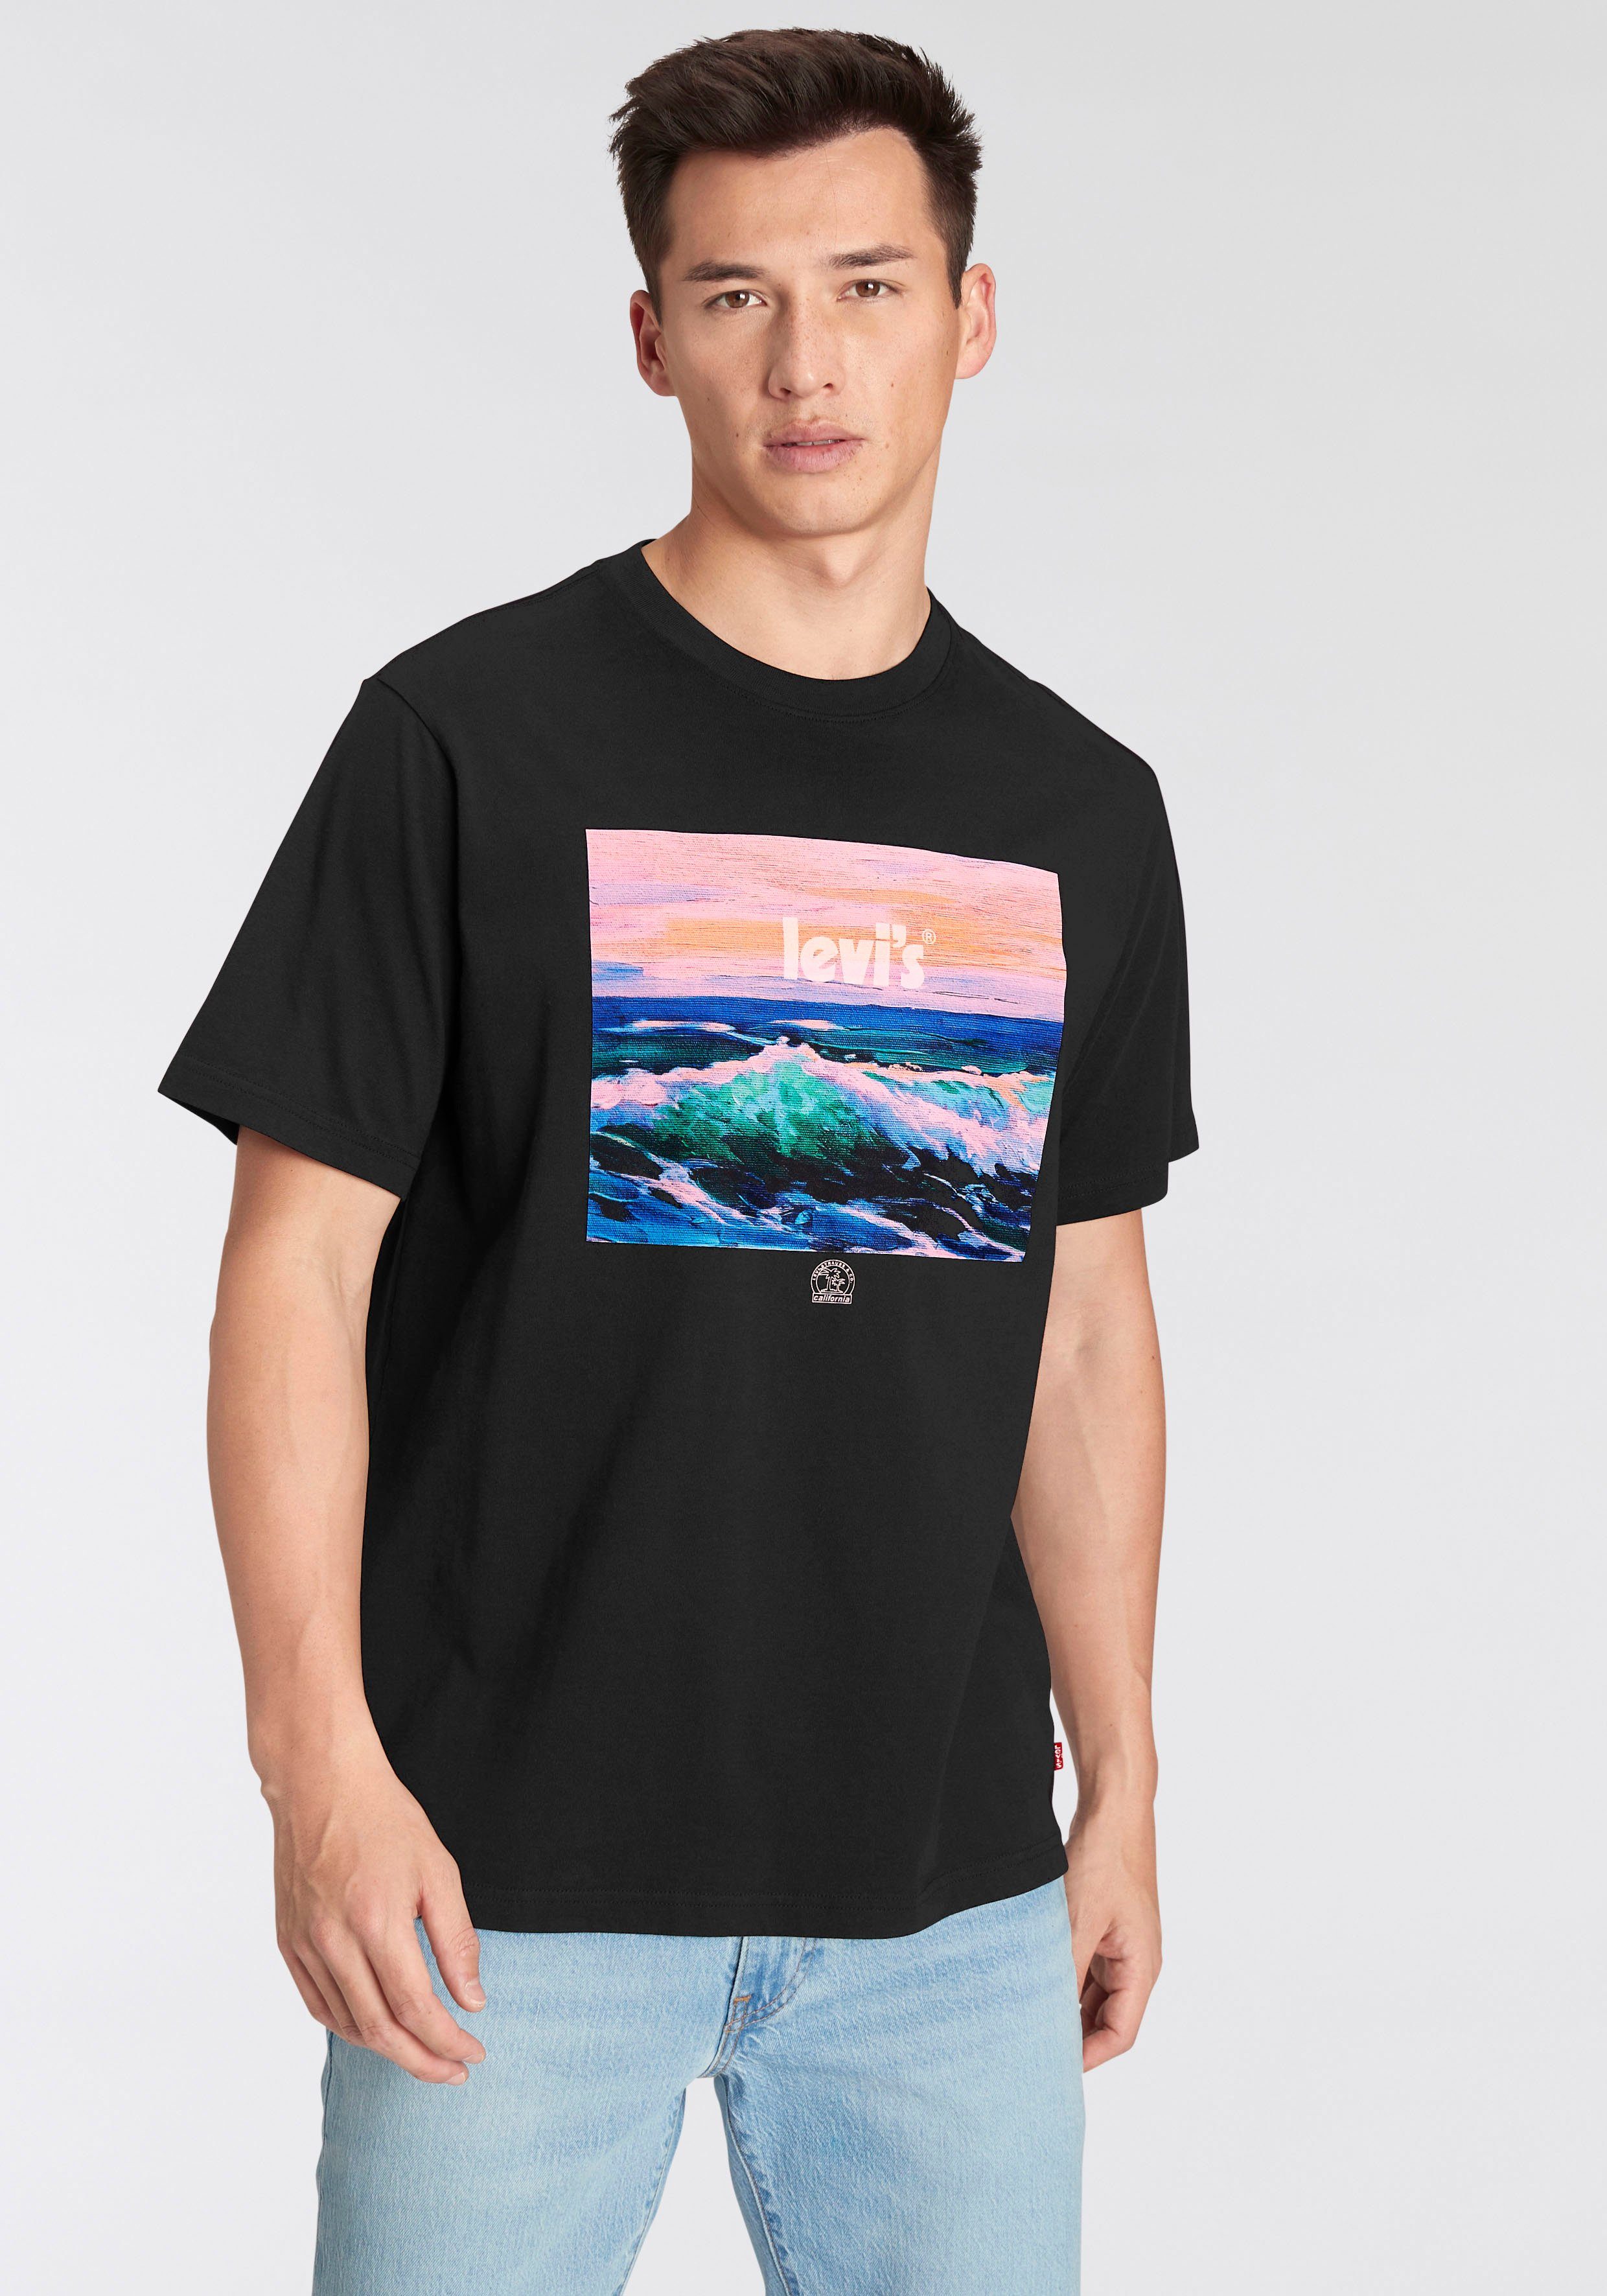 Levi's® T-Shirt SS RELAXED FIT WAVES großem POSTER mit CAVIAR TEE Frontprint